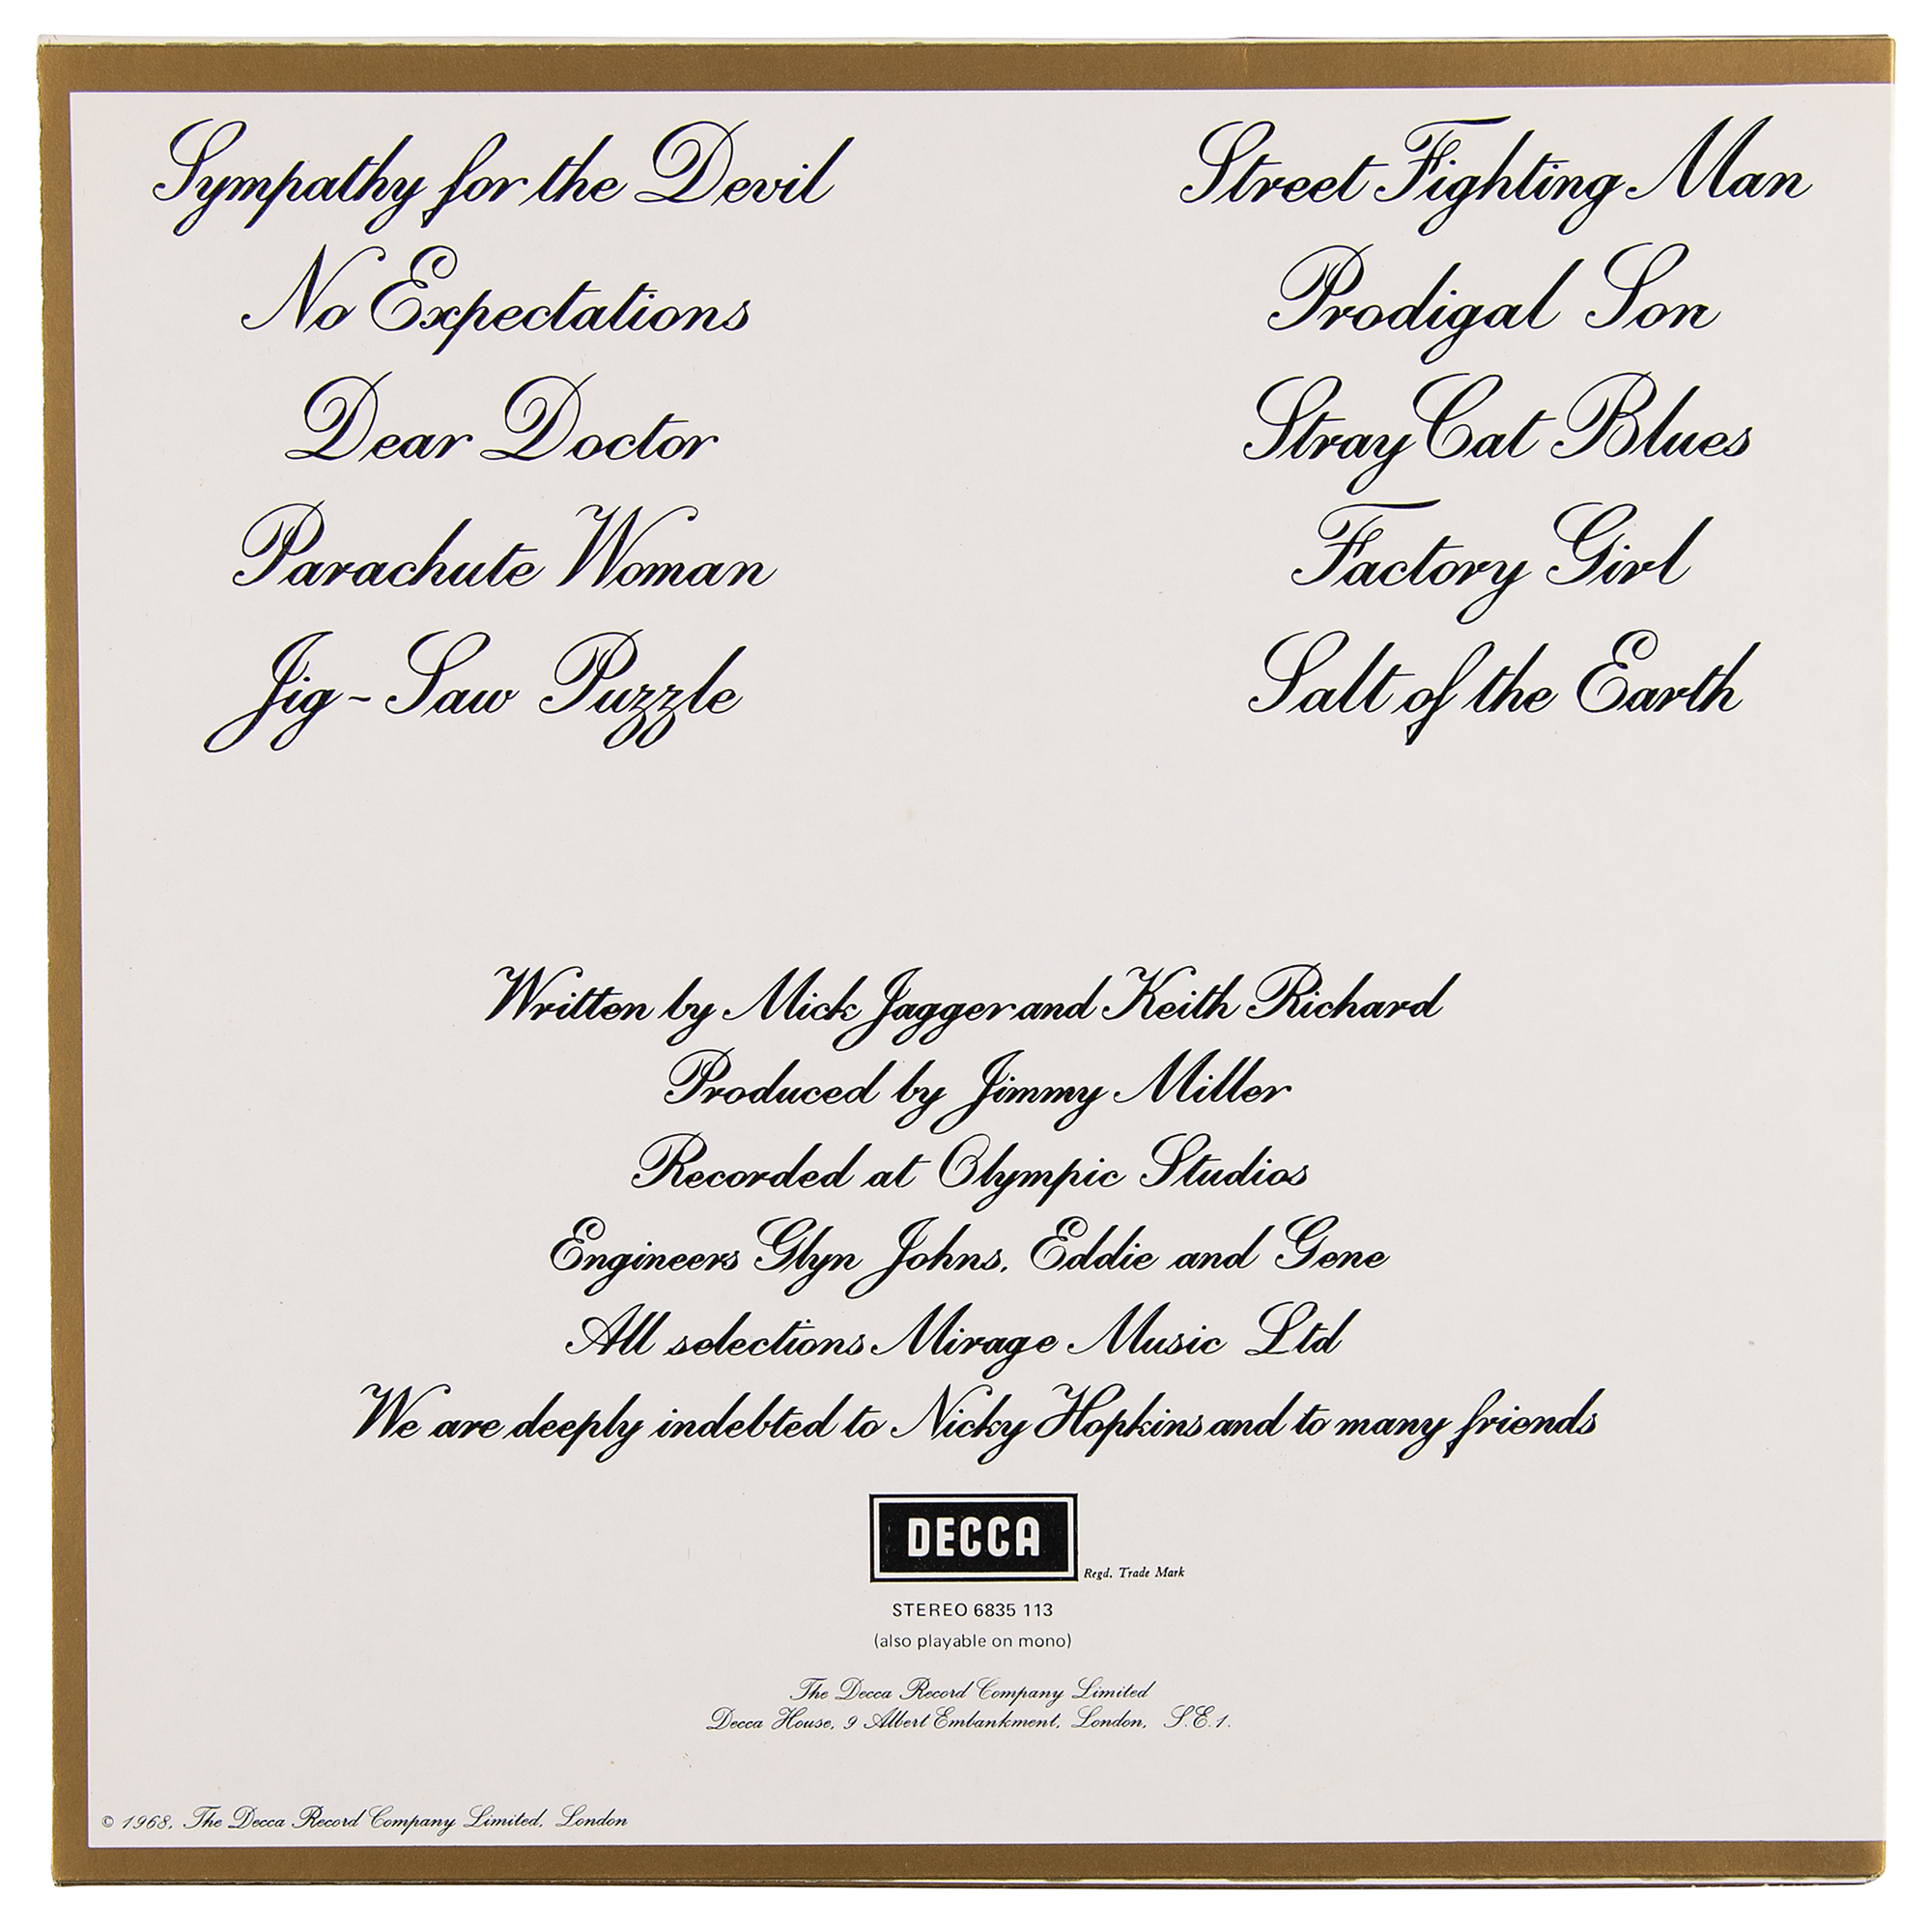 Mick Jagger Signed Rolling Stones Album -Beggars Banquet | RR Auction